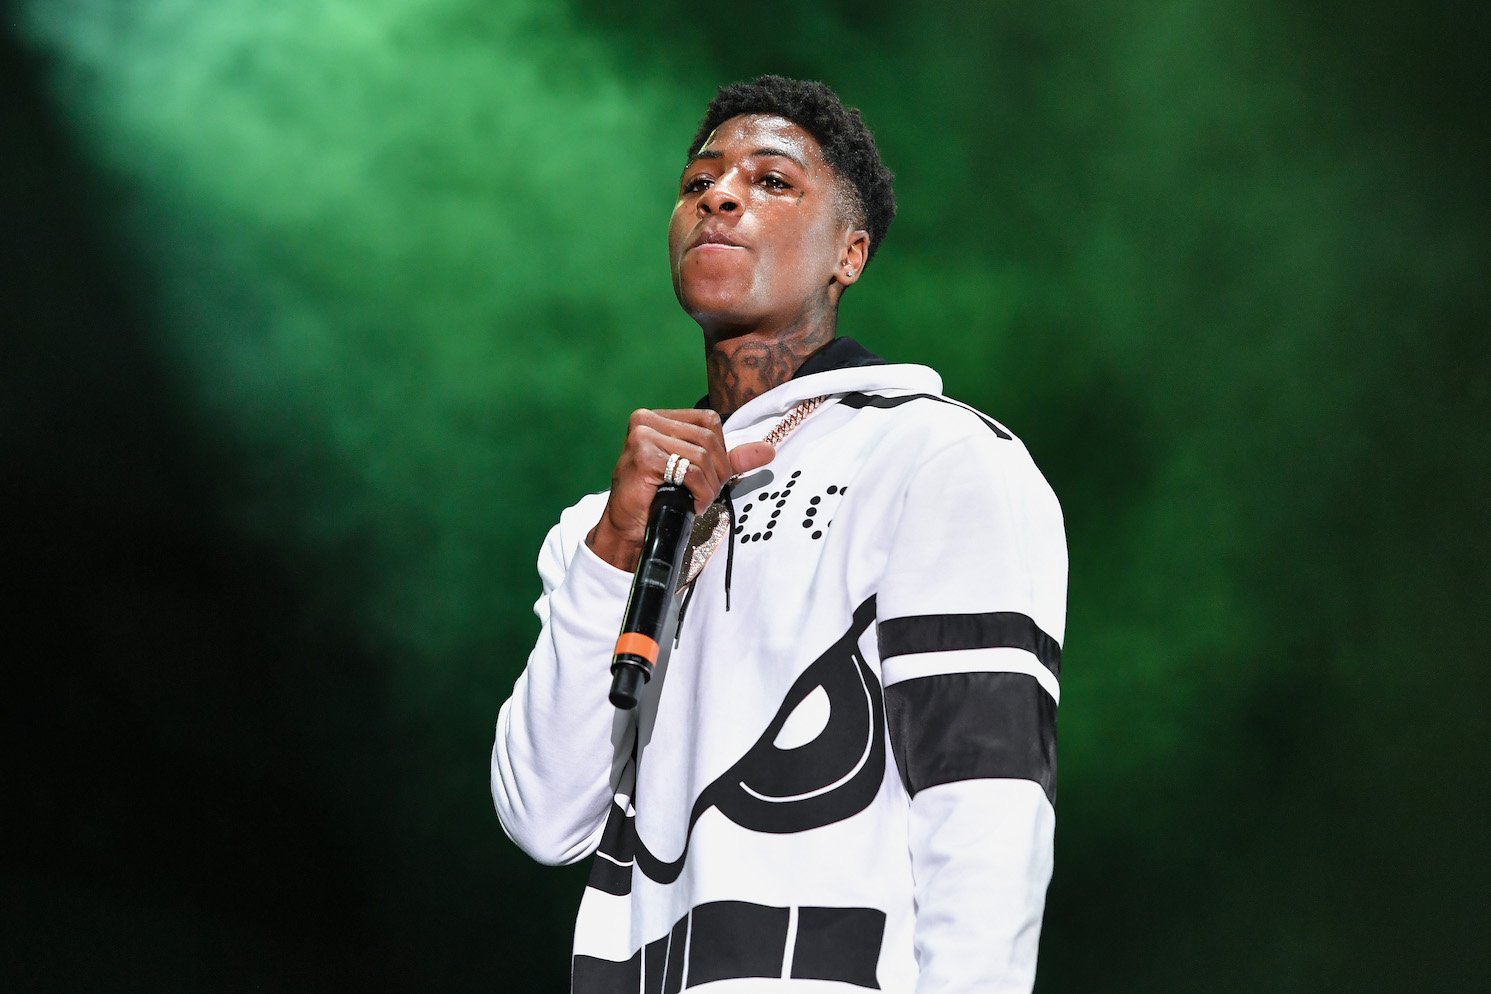 What is NBA Youngboy's Net Worth? How Many Kids Does He Have?